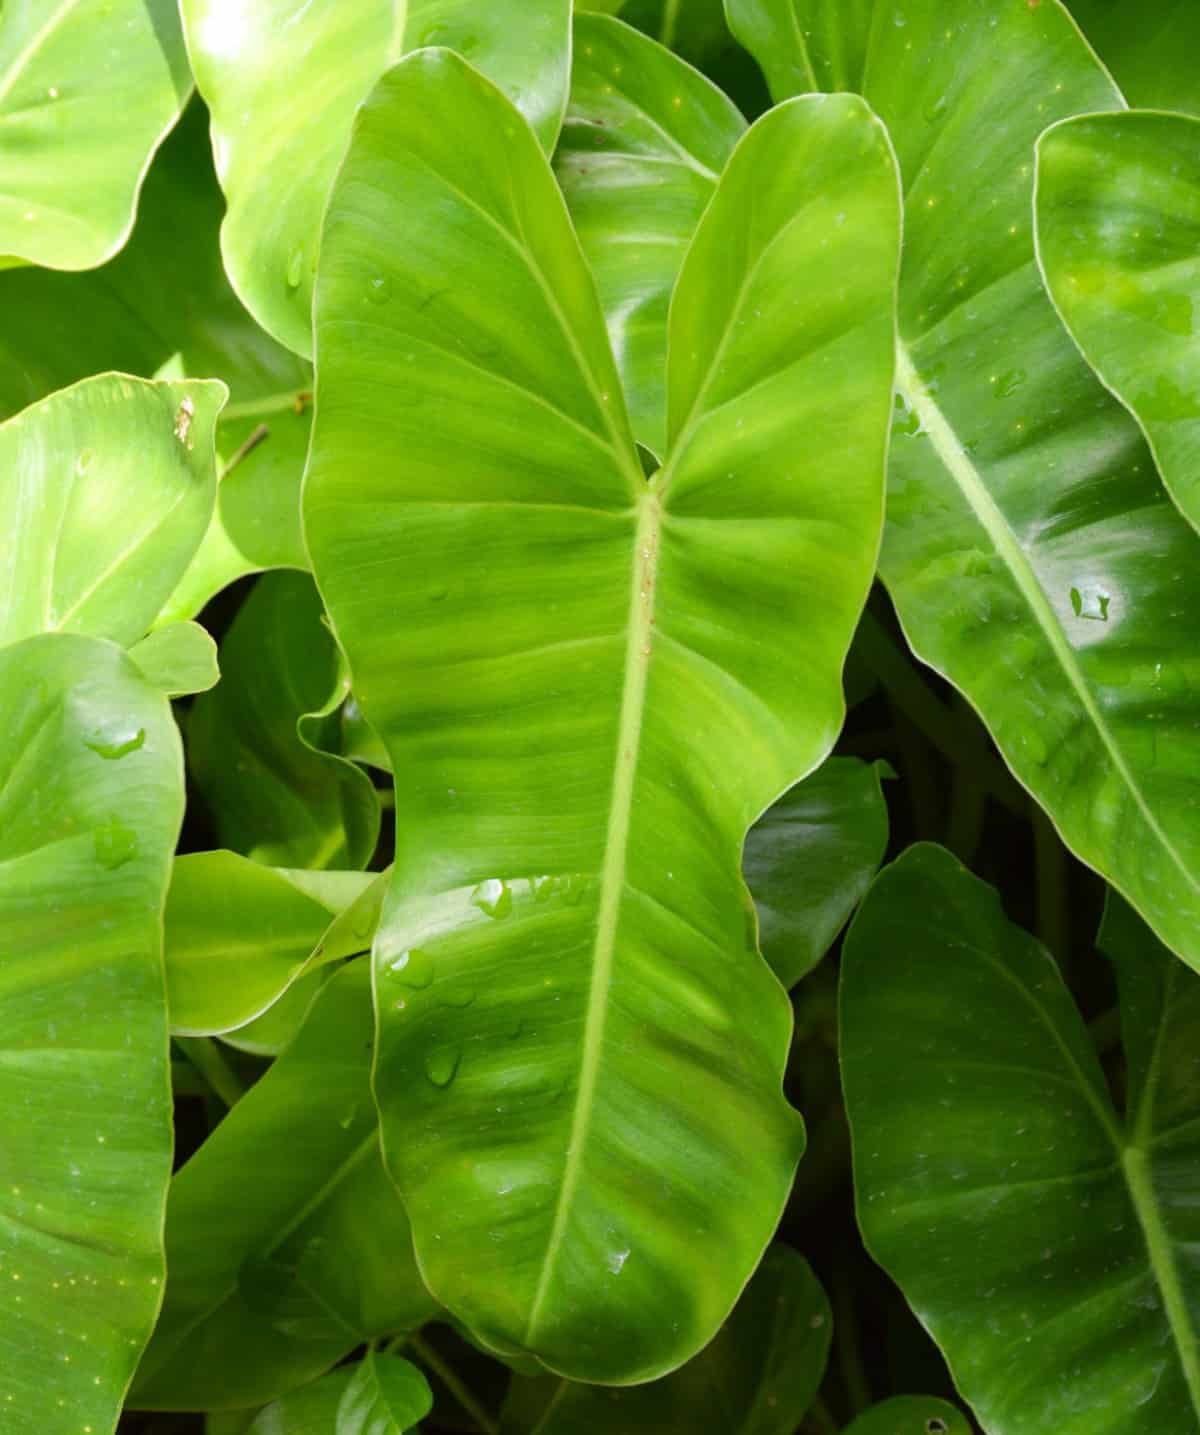 philodendron is a sturdy plant that comes in upright and trailing versions